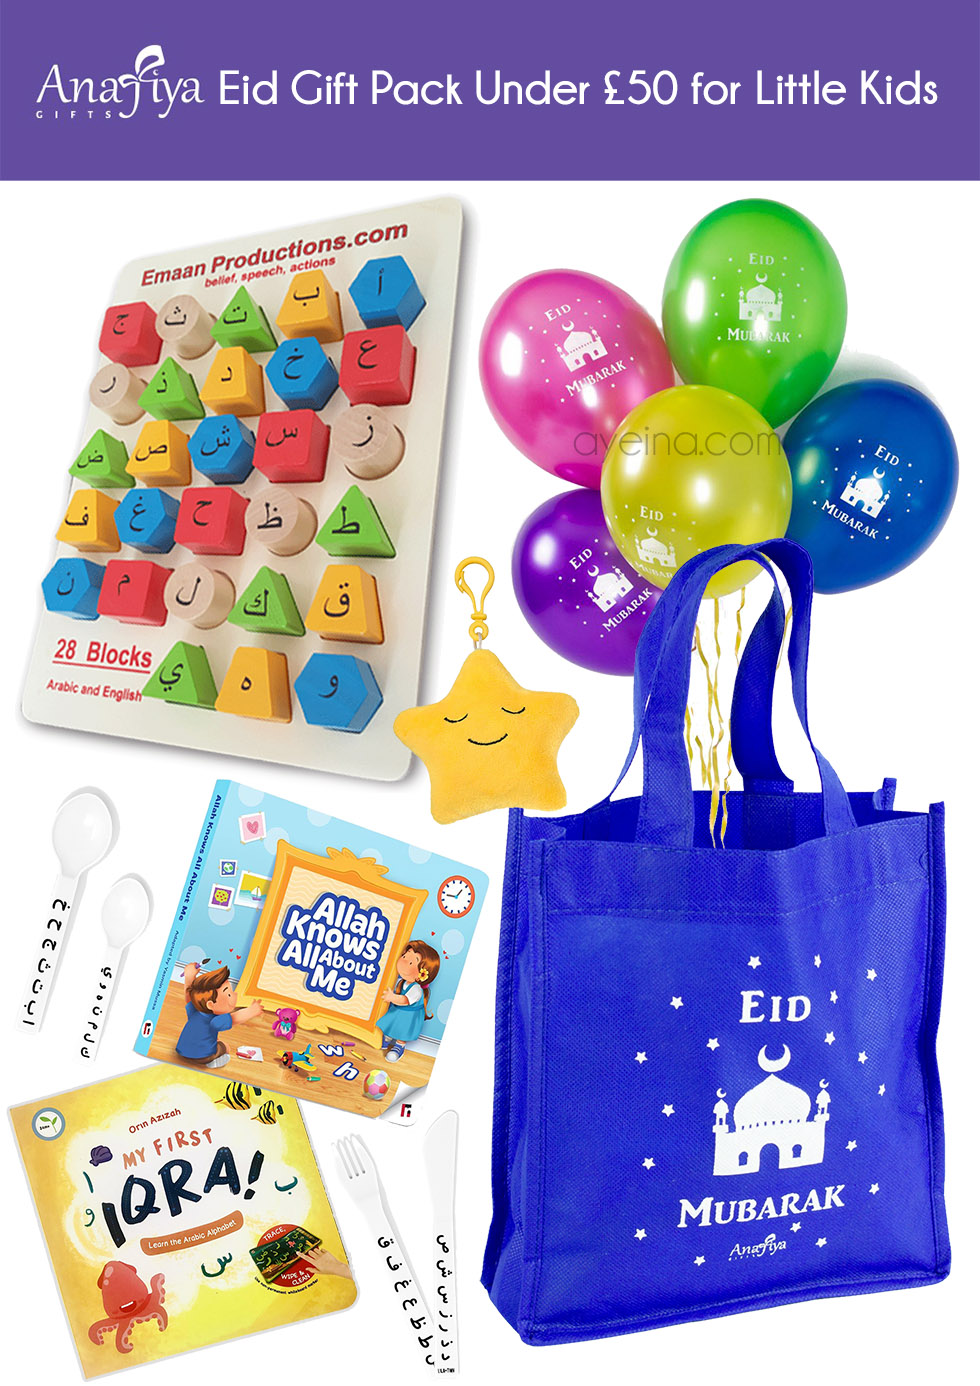 14 Eid Gifts for Kids Who Have Everything - MarocMama